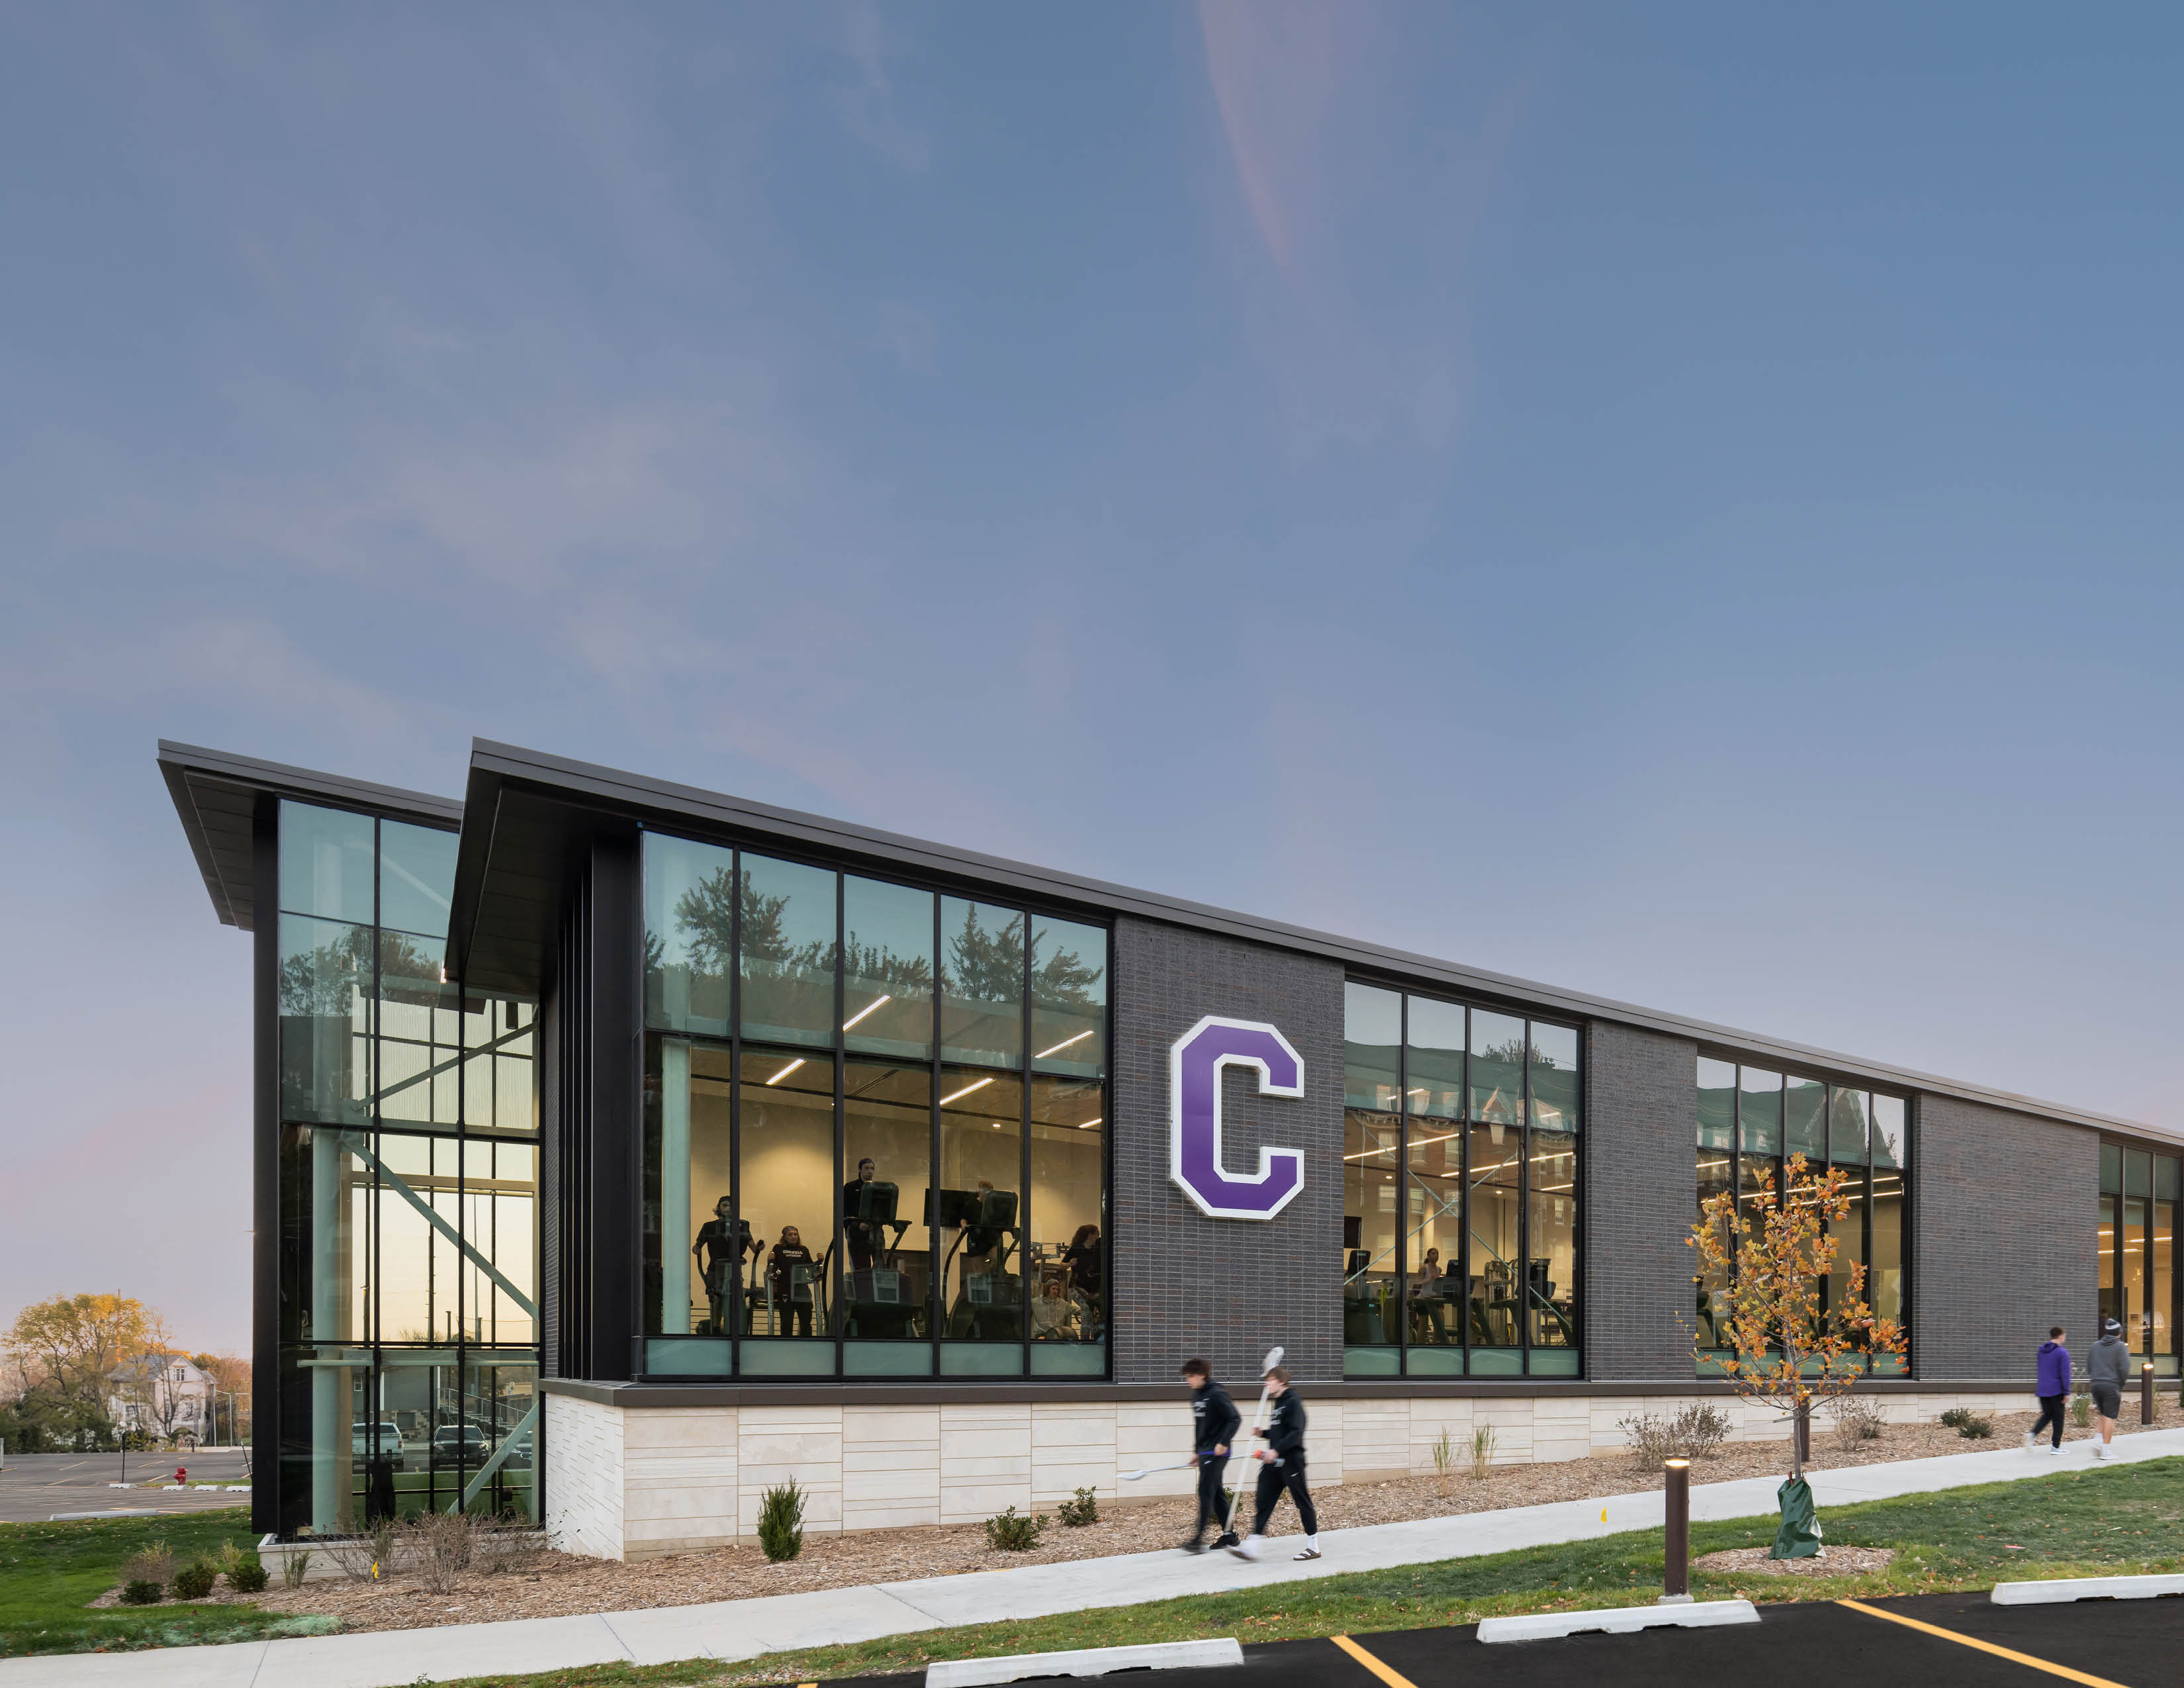 Cornell College Richard and Norma Small Athletic and Wellness Center